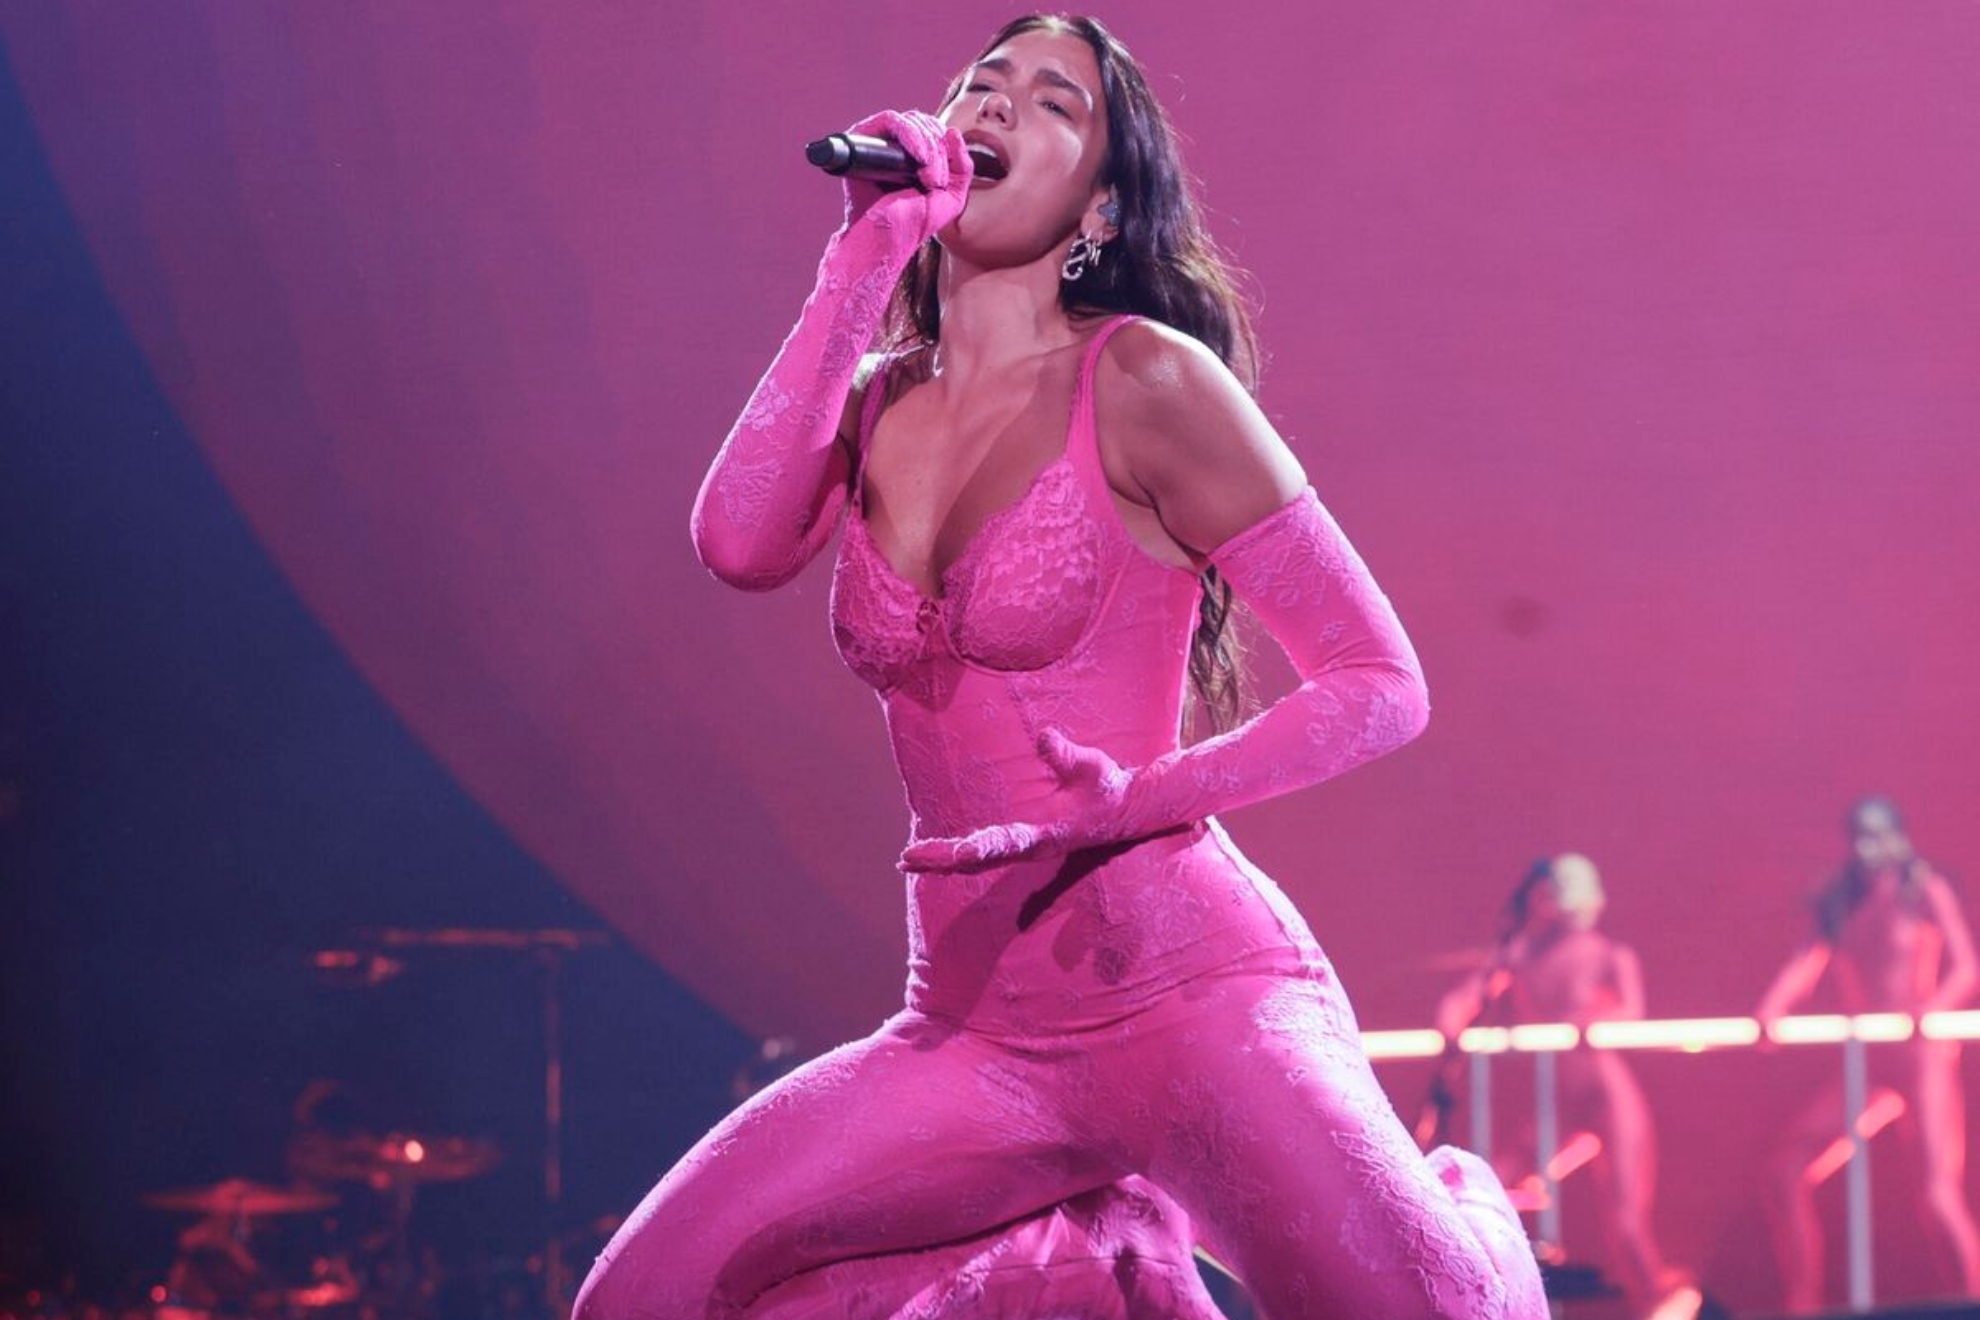 The astronomical amount Dua Lipa earns for her concerts